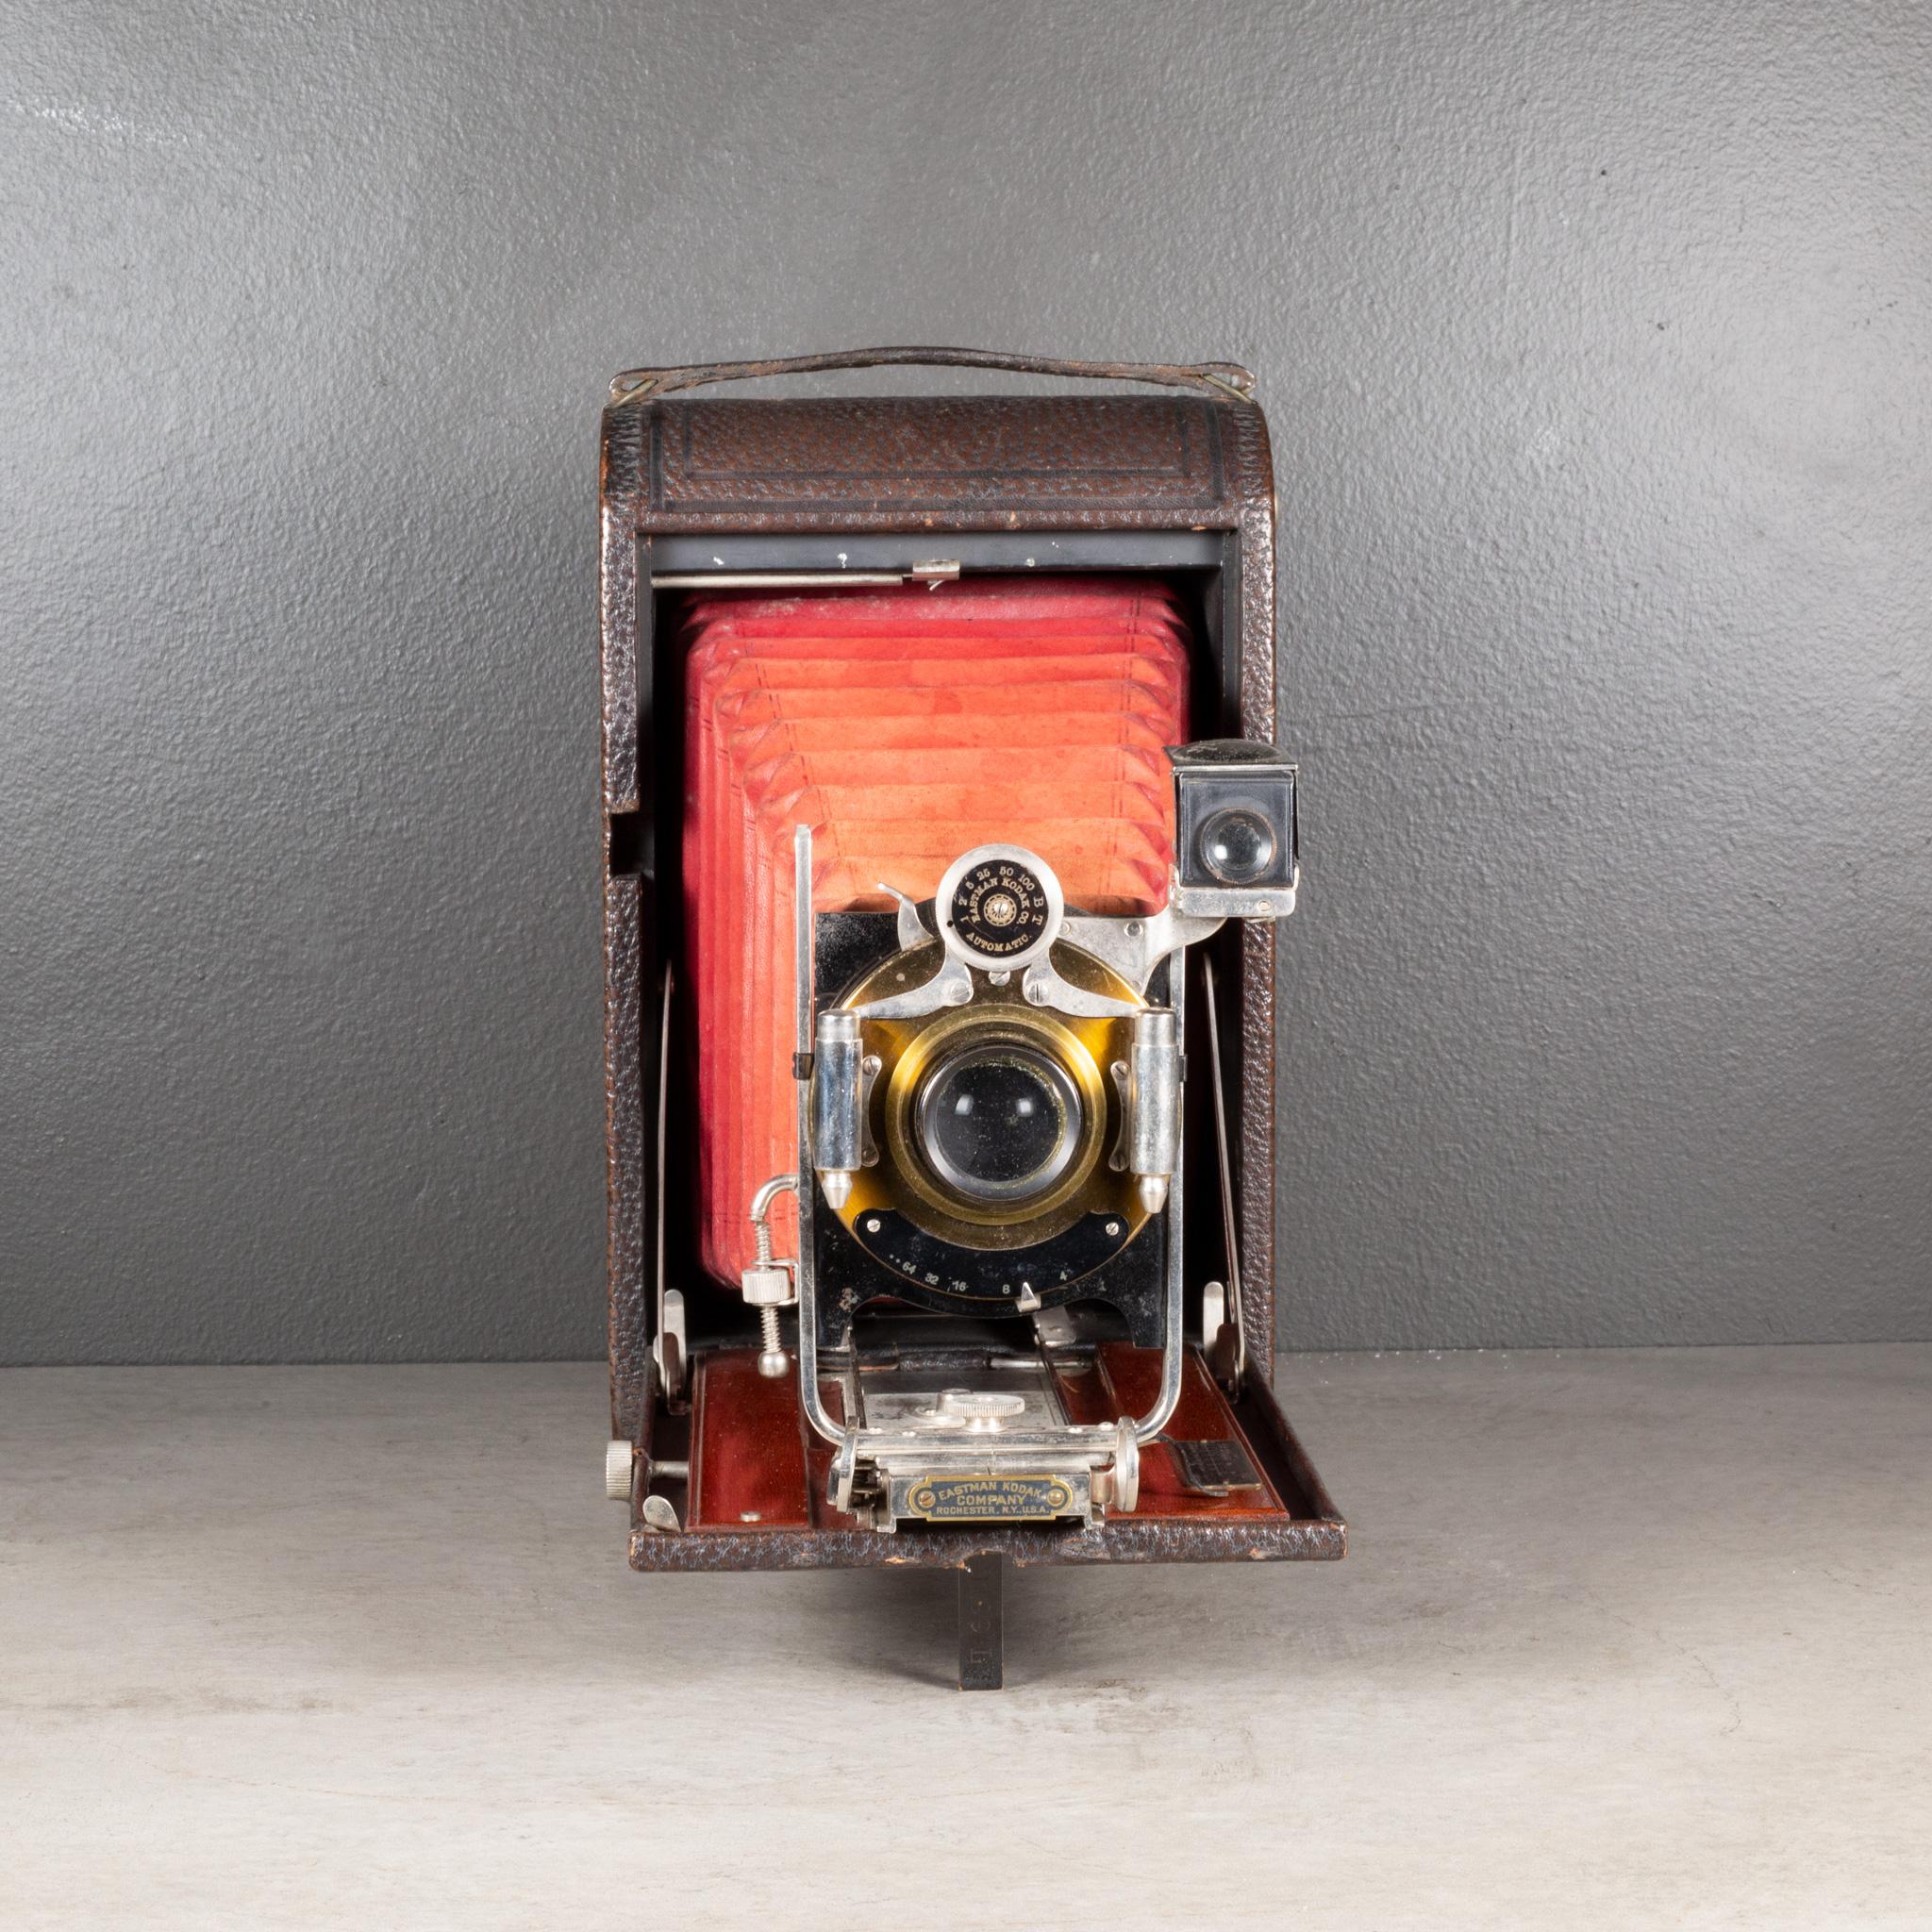 ABOUT

A large Eastman Kodak No. 3A folding camera with red bellows and Mahogany inlay. The body is wrapped in leather with chrome and brass accents. The camera folds to 2.5 inches. This piece has retained its original finish with minor structurally